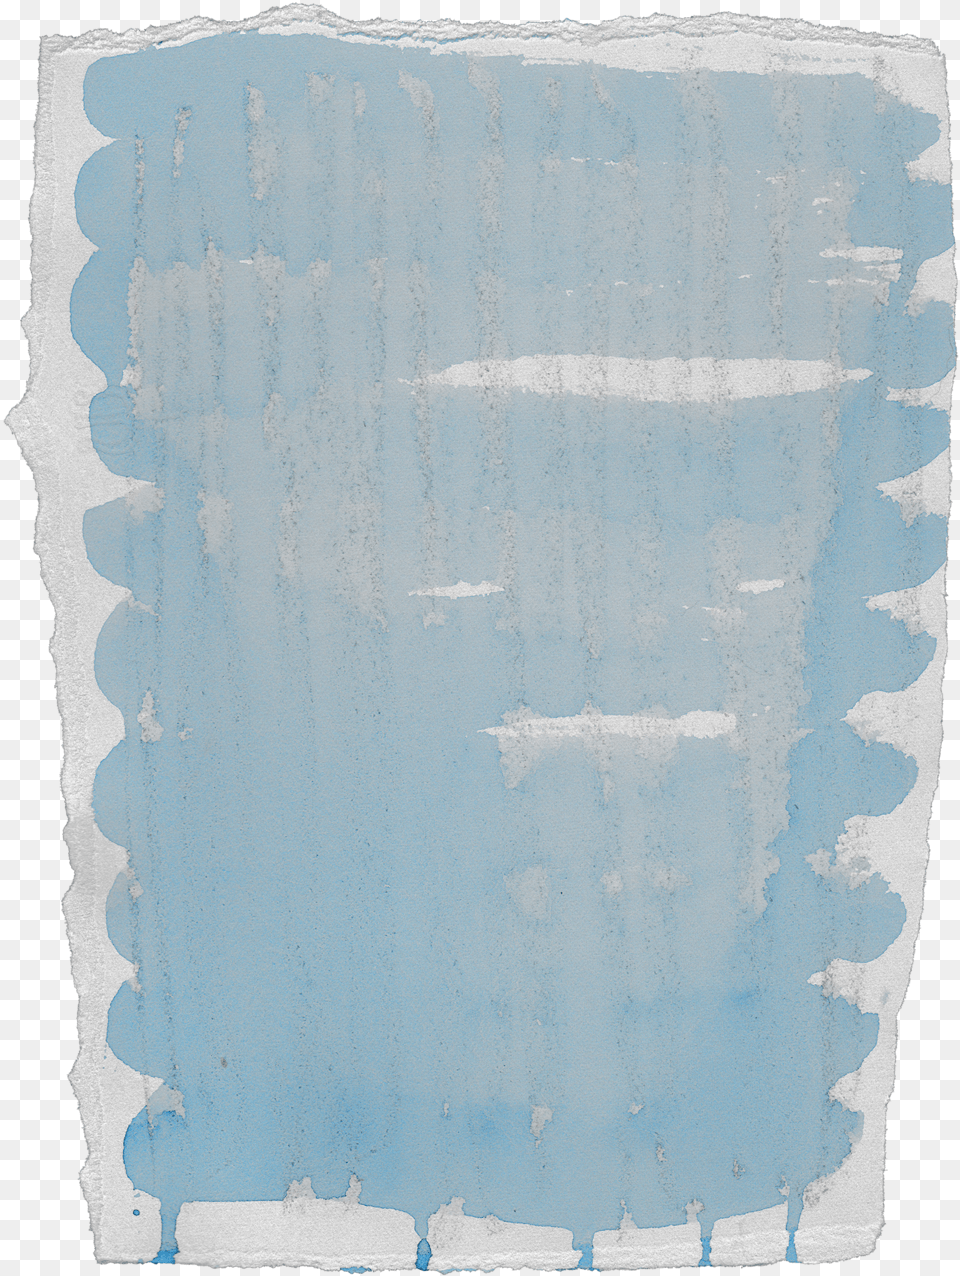 Webbackground, Home Decor, Ice, Rug, Texture Free Transparent Png